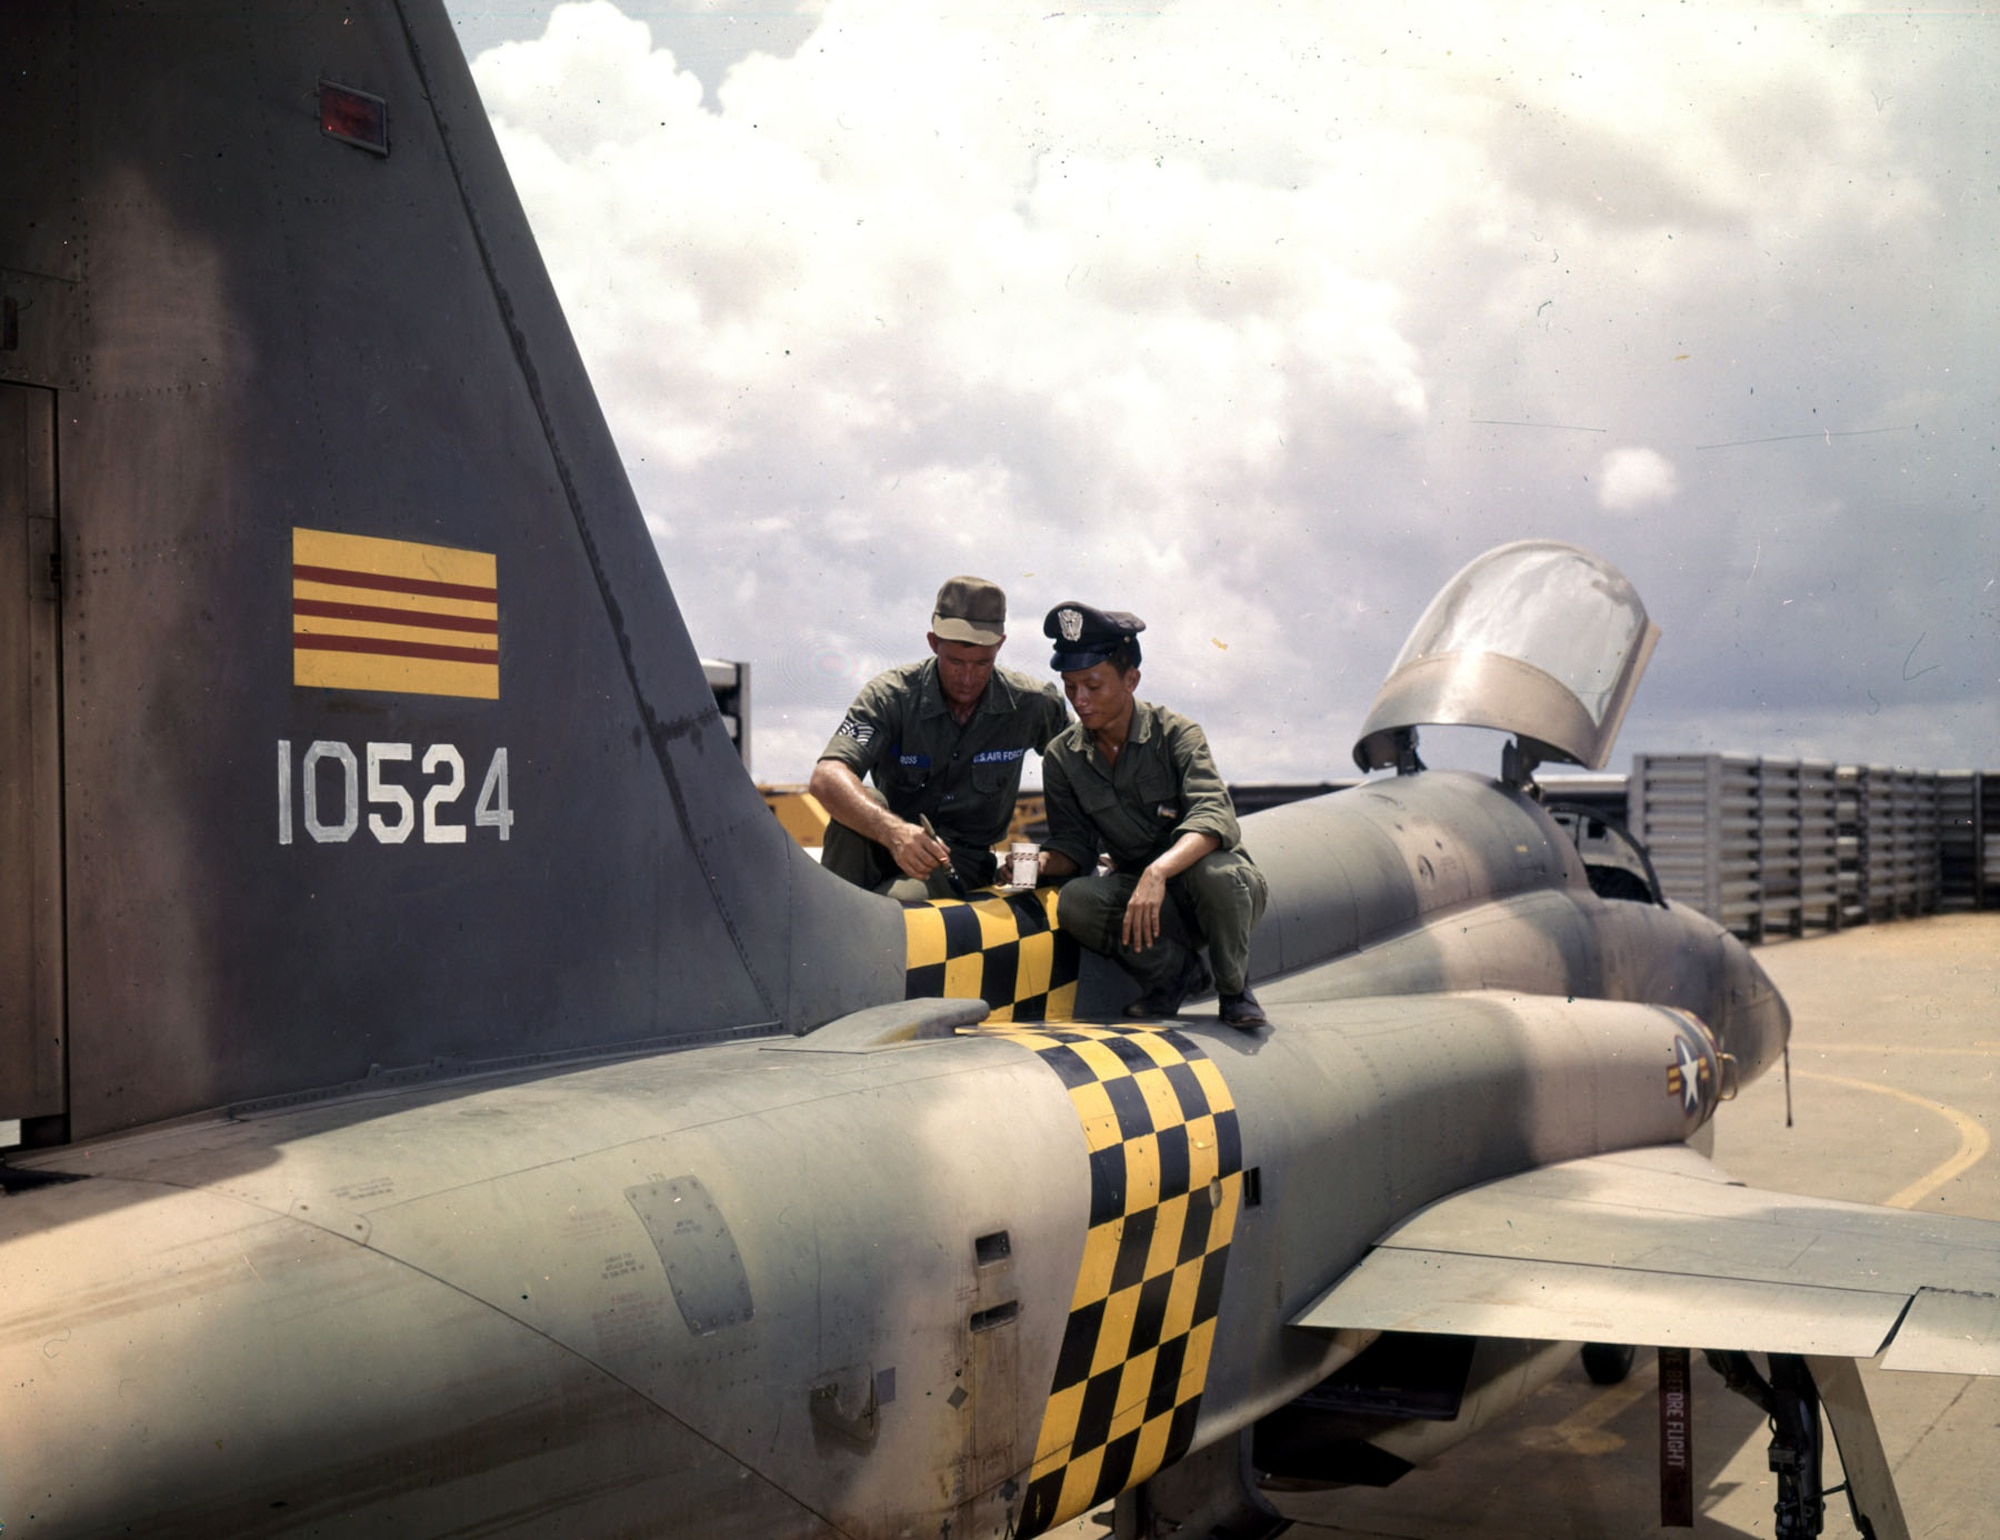 The U.S. gave South Vietnam modern aircraft like this F-5 Freedom Fighter. (U.S. Air Force photo)